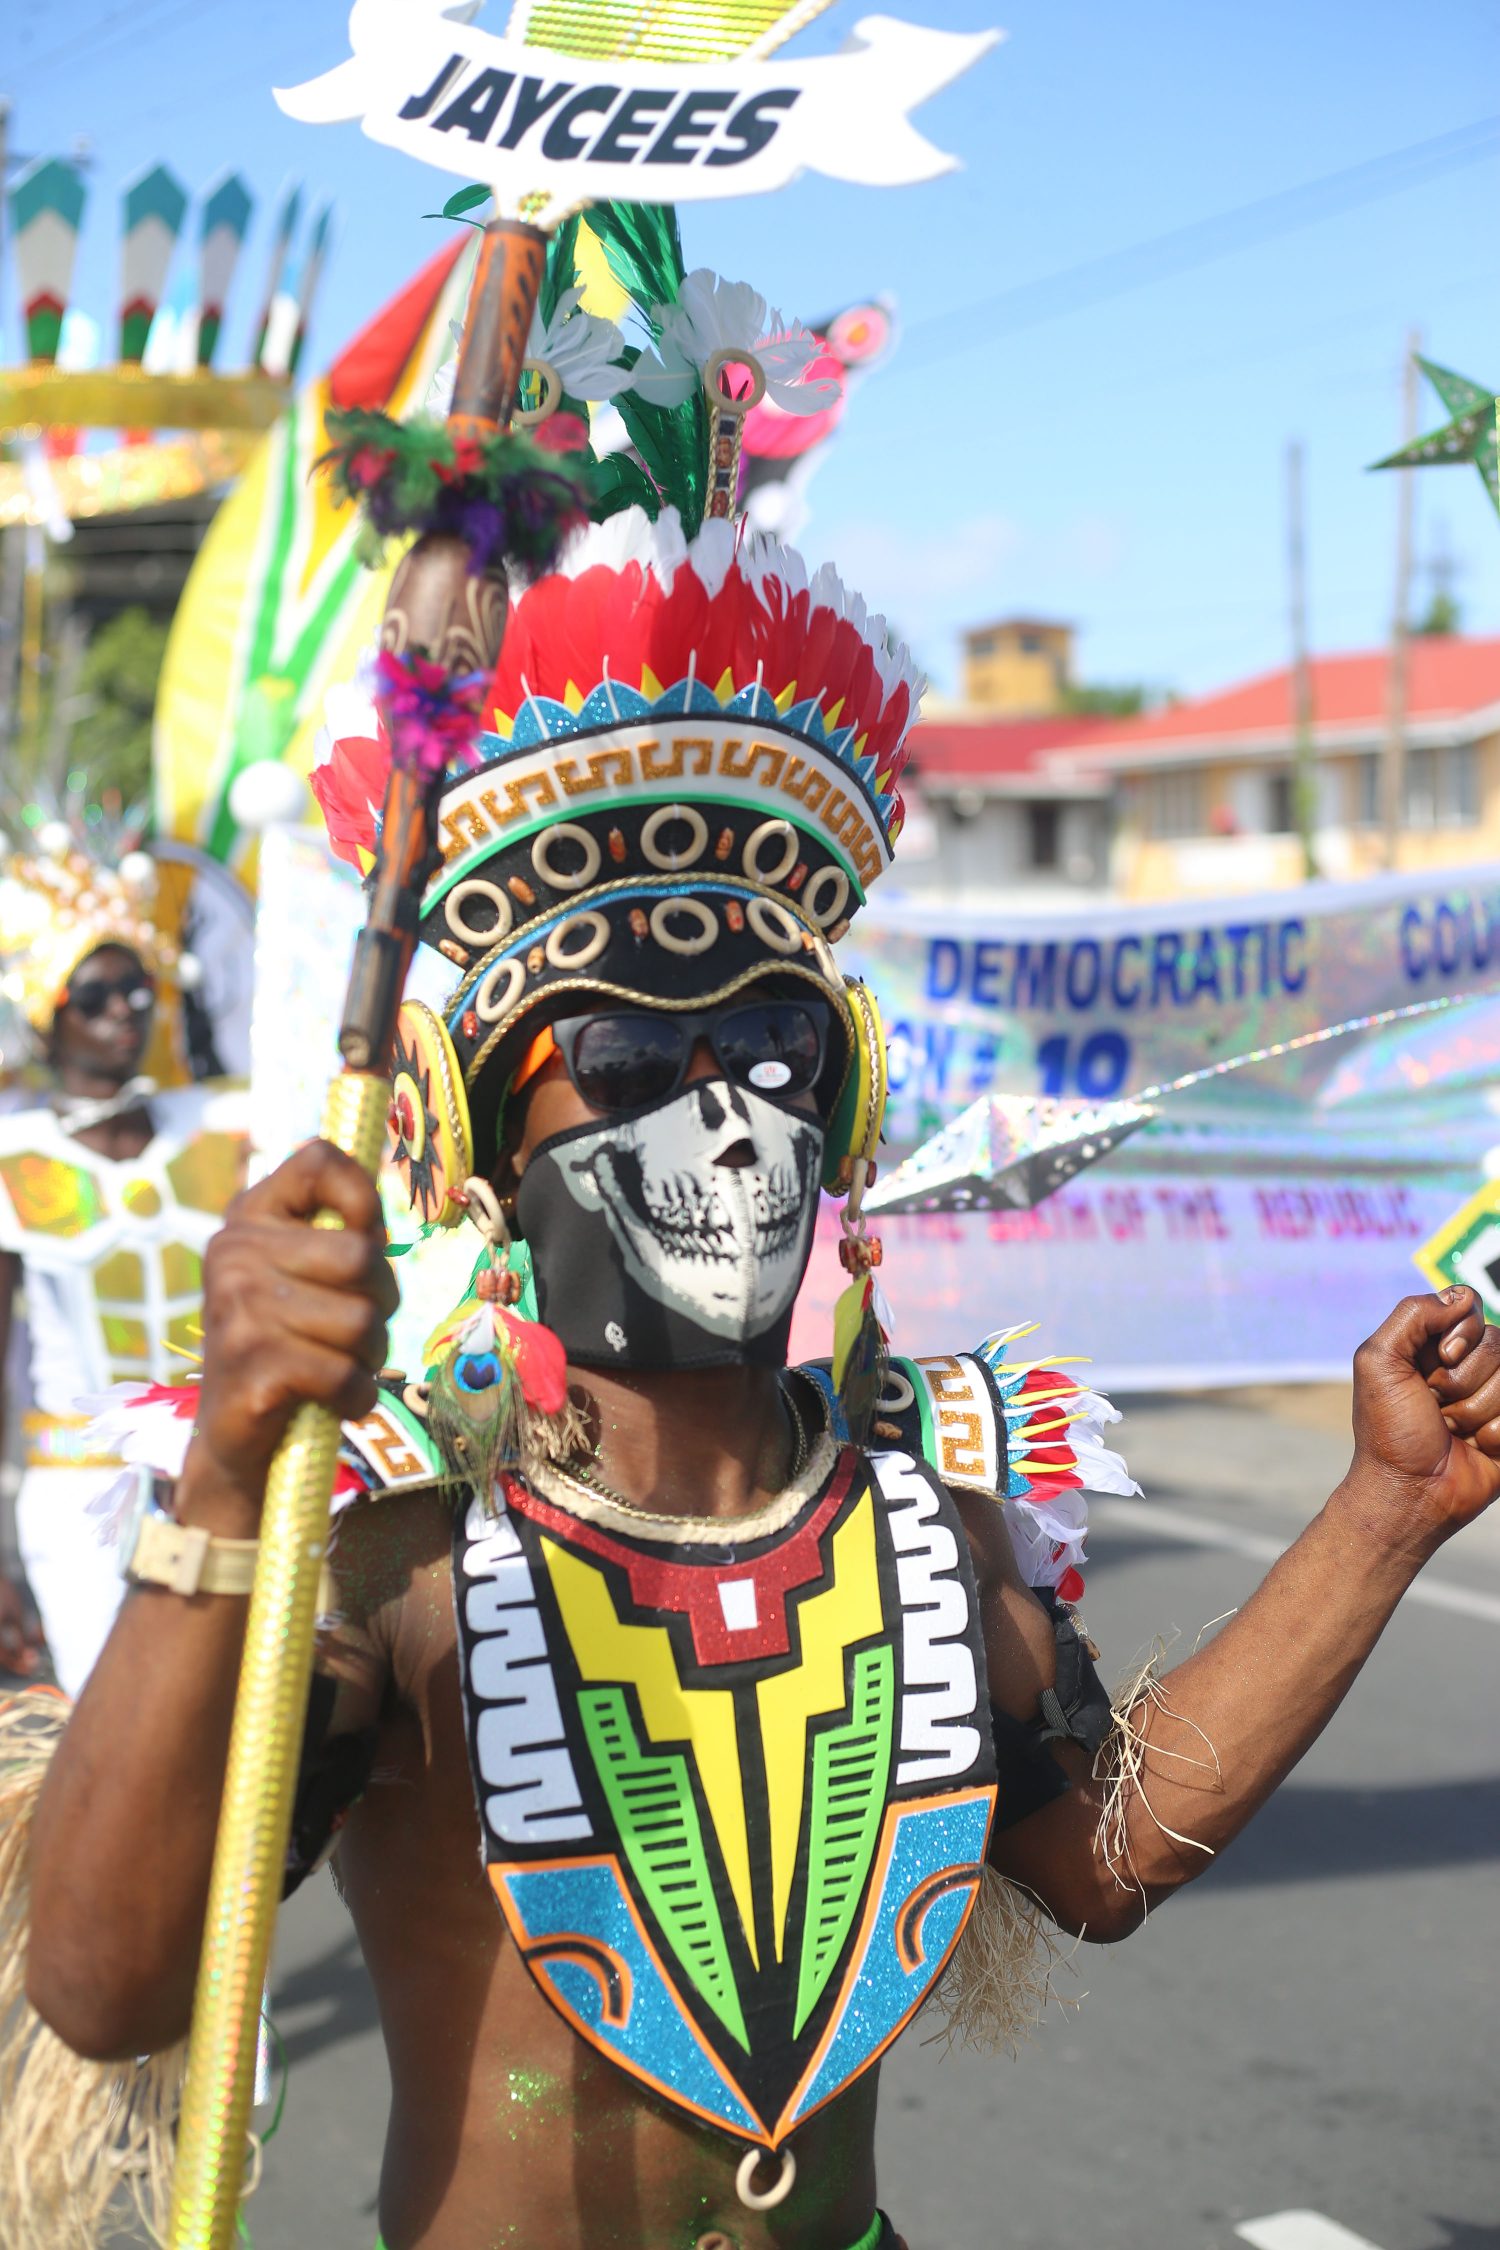  A reveller from the Regional Democratic Council of Region Ten during the Mashramani costume and float parade on Friday. (Photo by Keno George)

